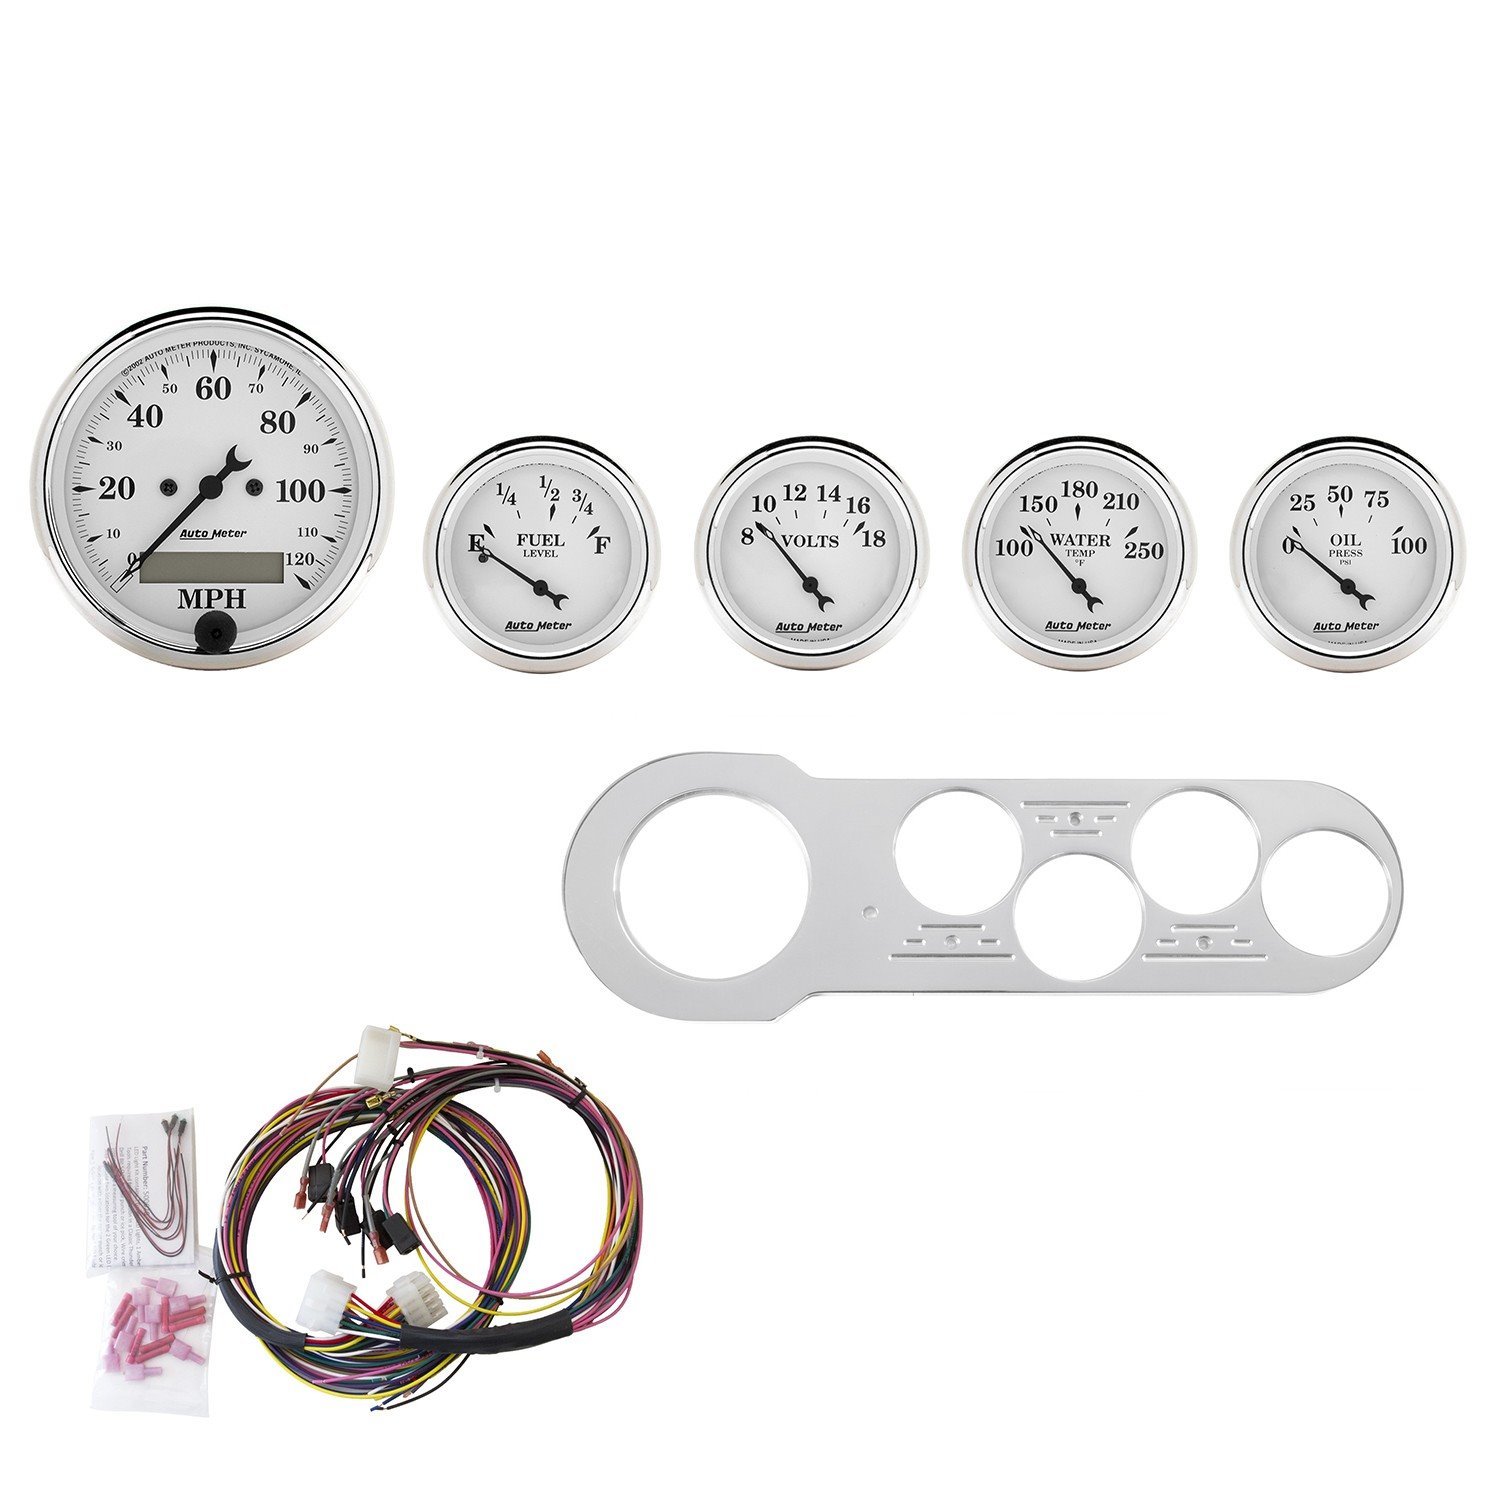 5-Gauge Direct-Fit Dash Kit 1953-1954 Chevy Car - Old Tyme White Series